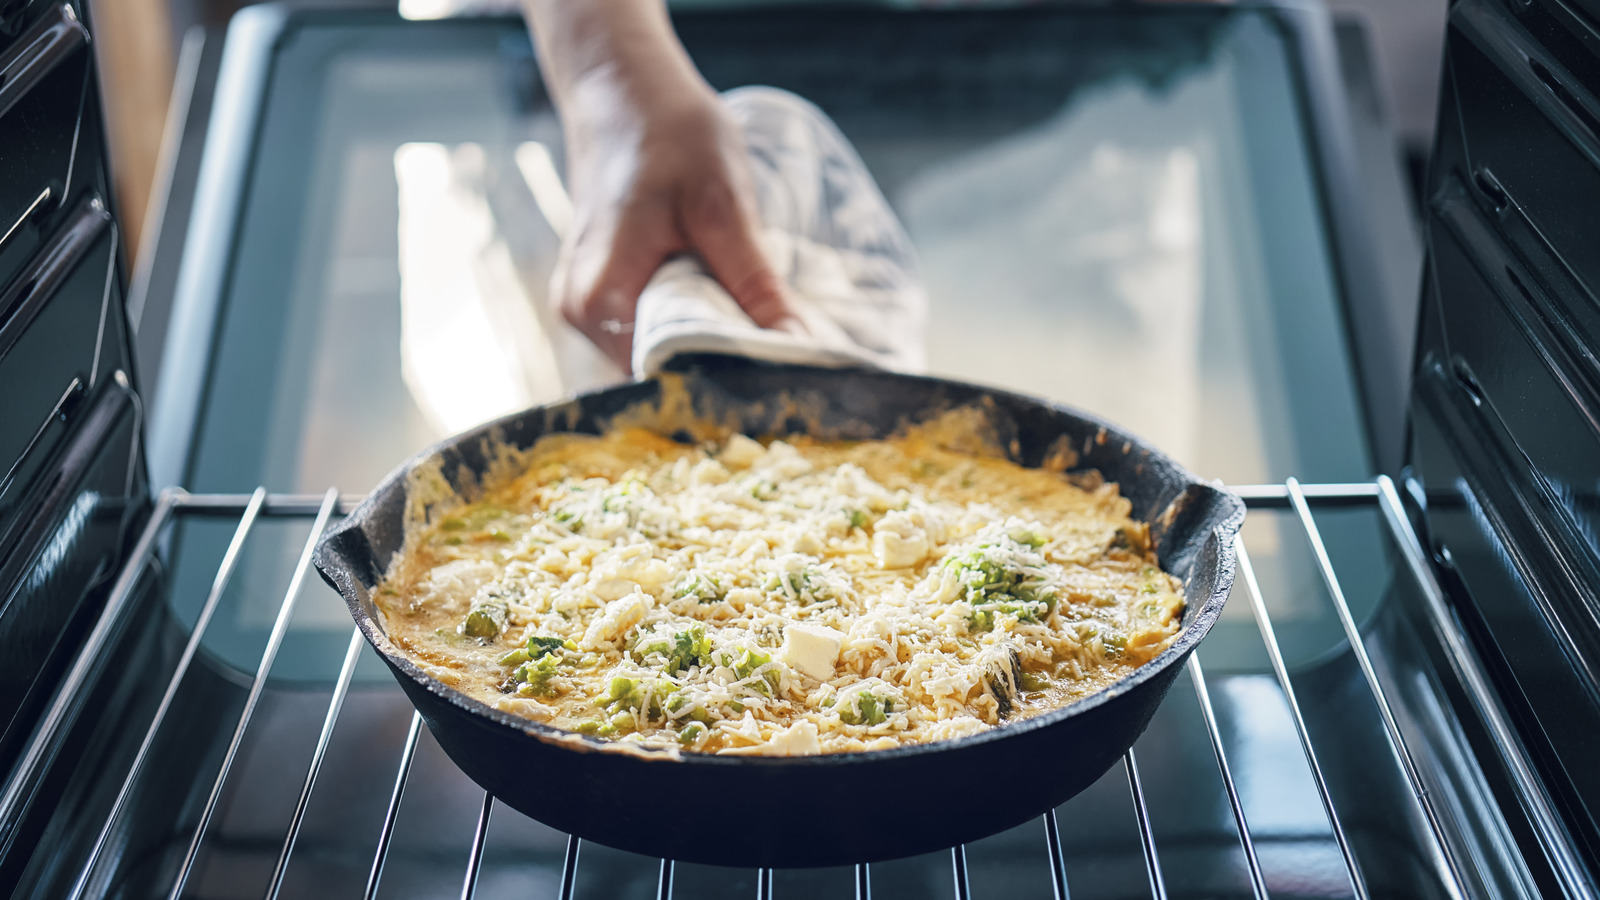 https://www.tastingtable.com/img/gallery/avoid-cast-iron-pans-when-making-casserole-with-highly-acidic-ingredients/l-intro-1697233075.jpg